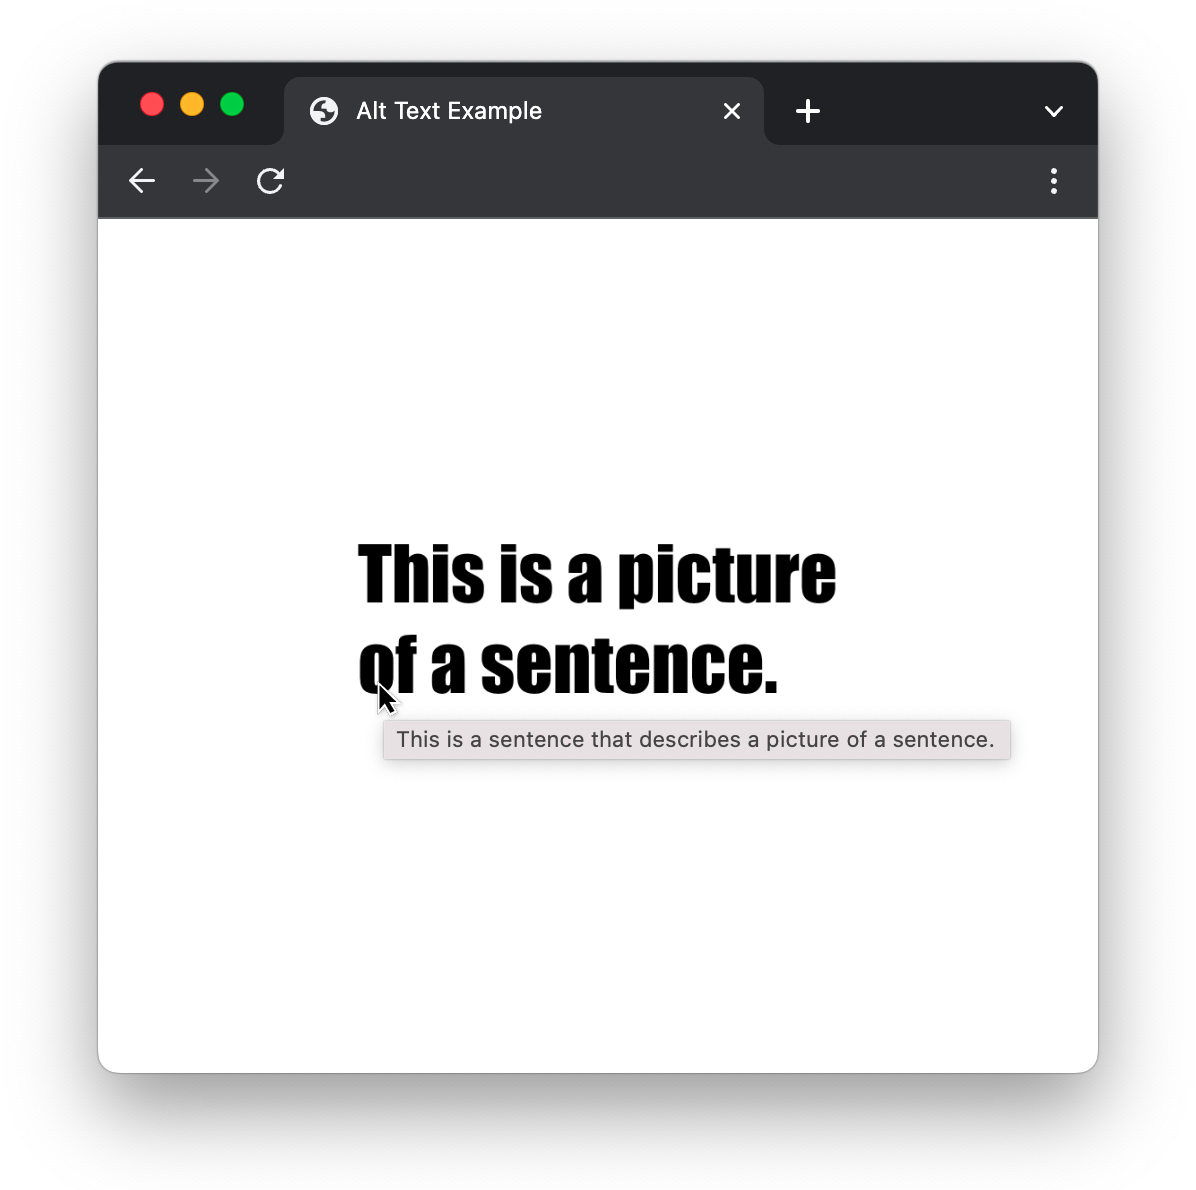 Screenshot of a website with heading "This is a picture of a sentence" and descriptive text, including "Alt Text Example" lab